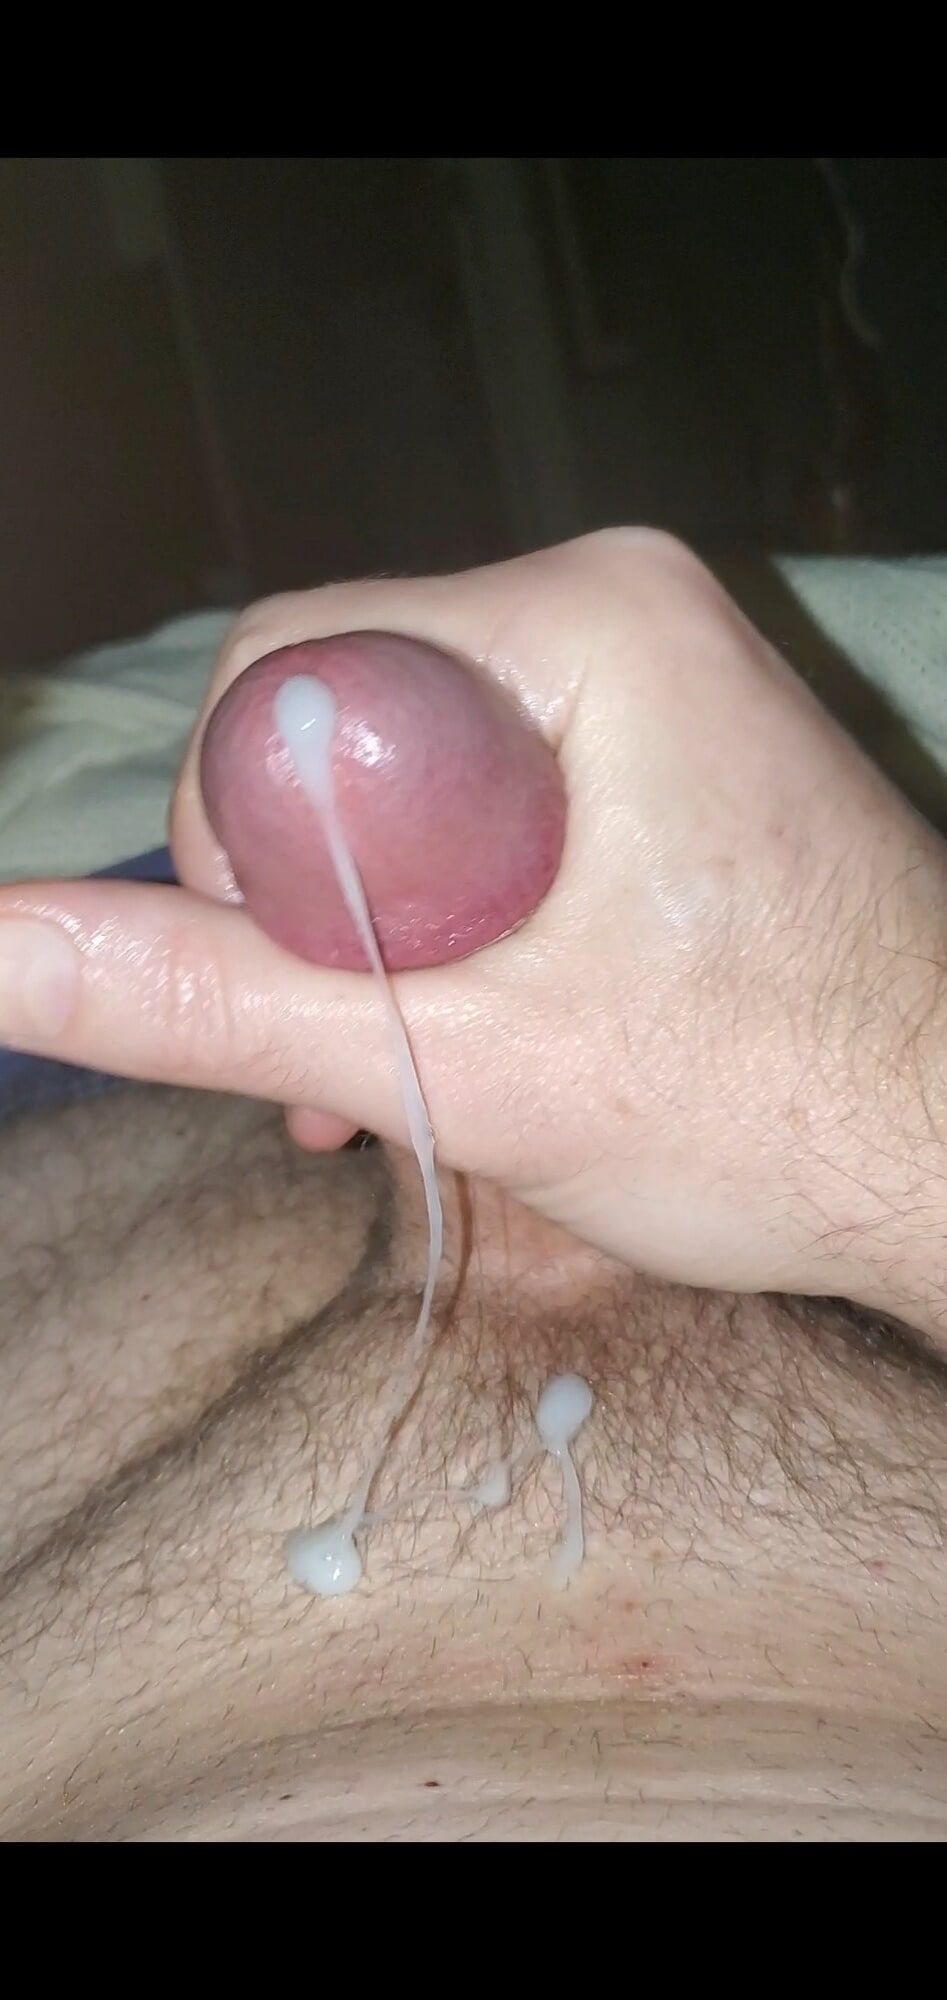 My cock #6